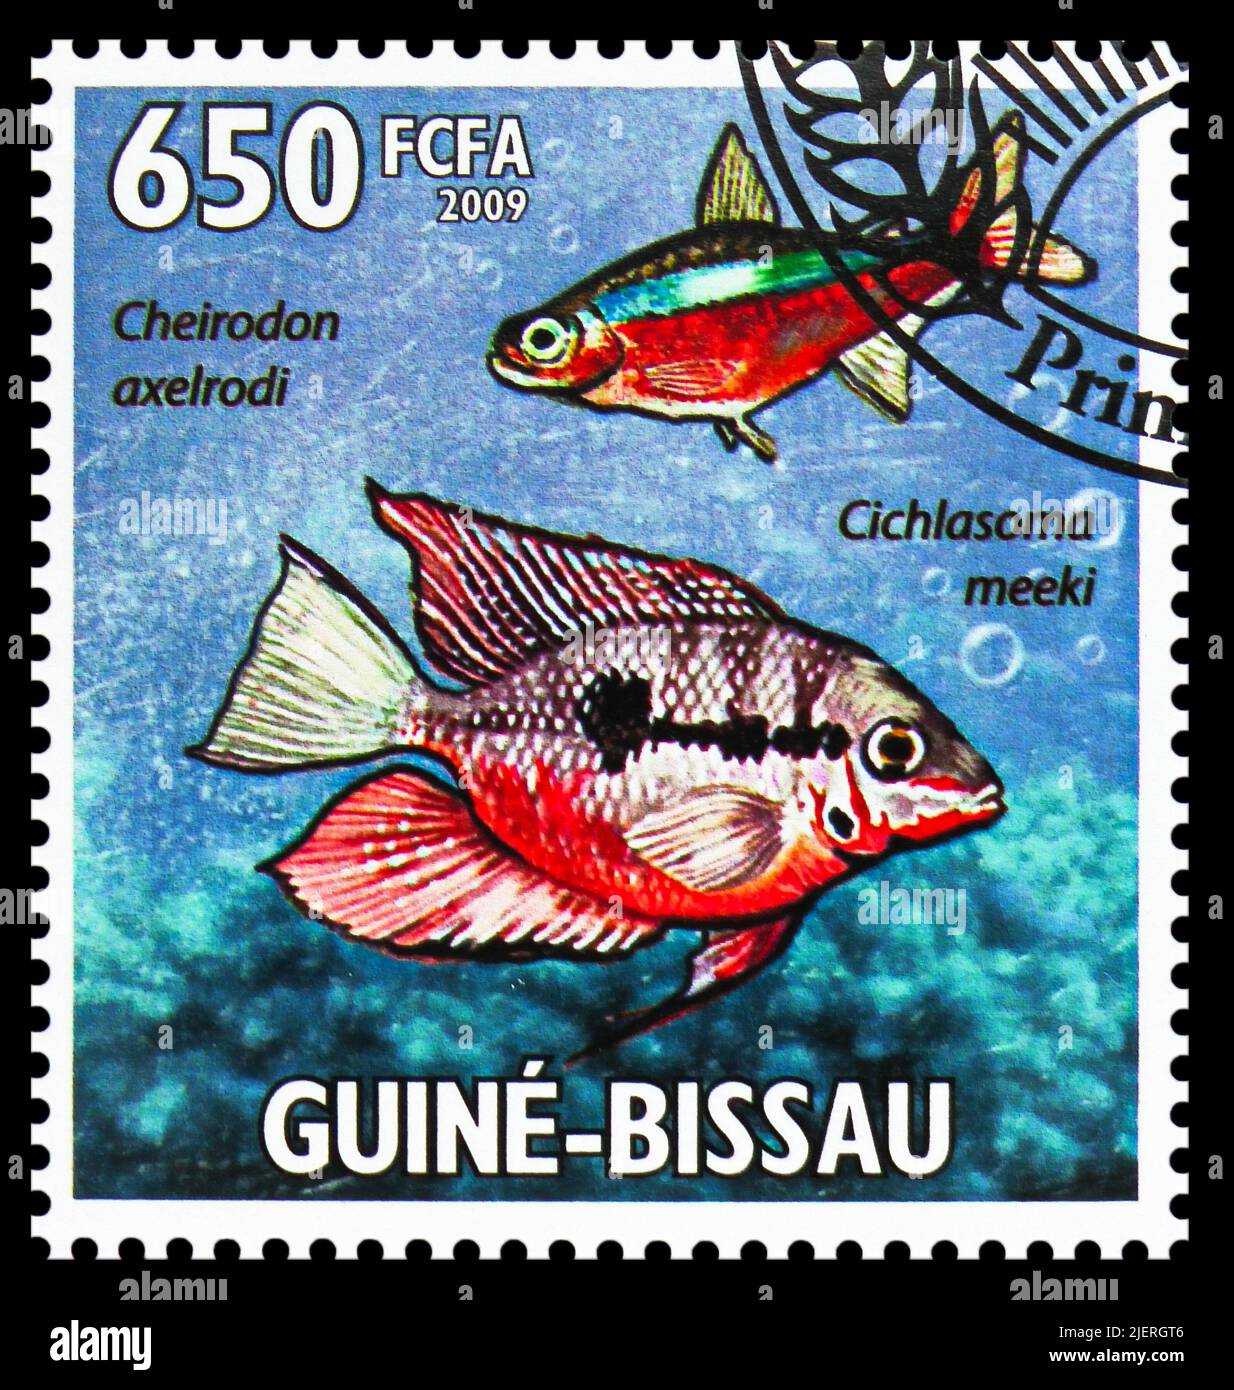 MOSCOW, RUSSIA - JUNE 17, 2022: Postage stamp printed in Guinea-Bissau shows Cardinal Tetra (Paracheirodon axelrodi), Firemouth cichlid (Thorichthys m Stock Photo